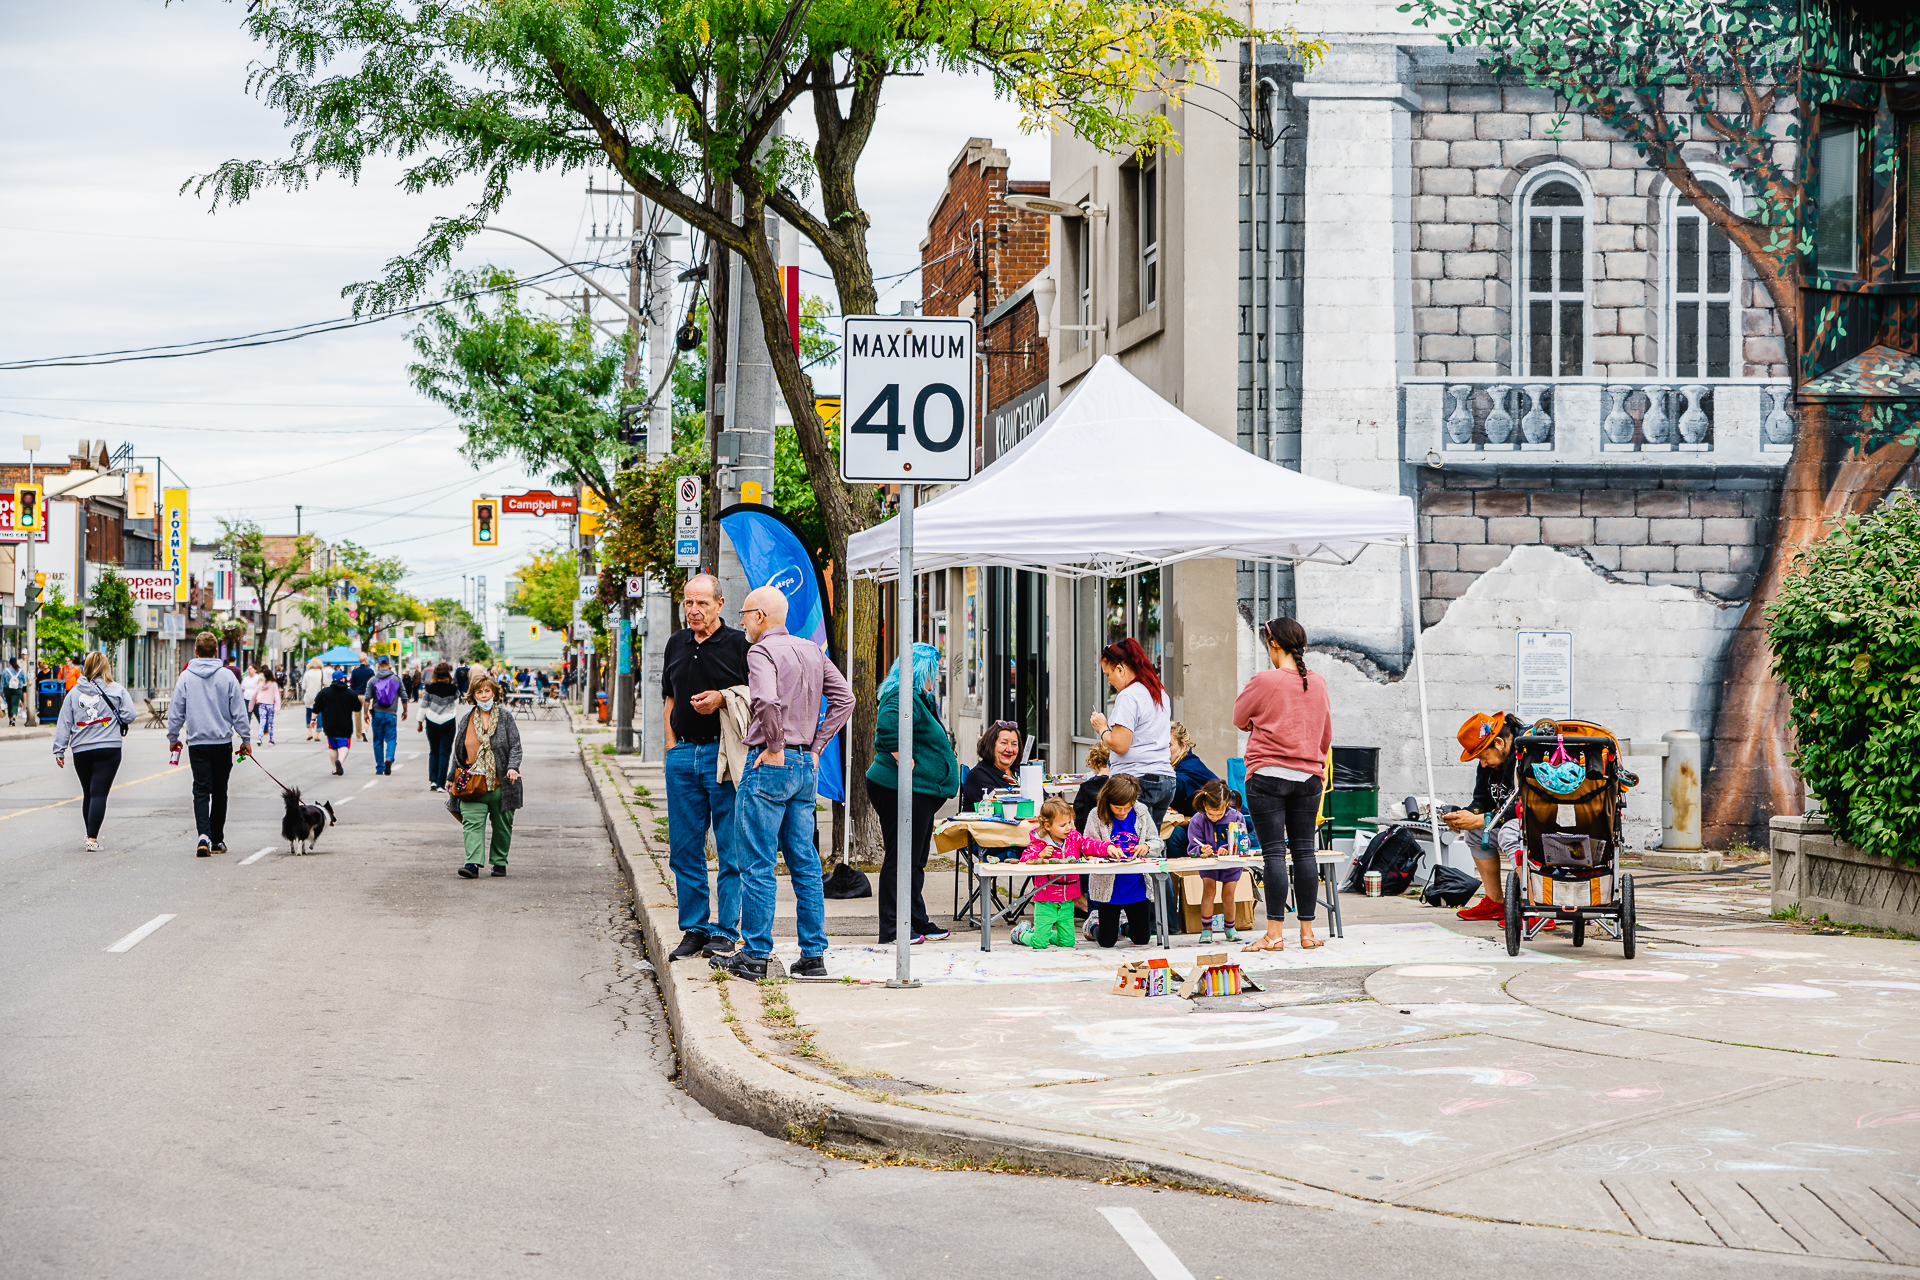 Residents enjoy the sidewalk festival in Hamilton, Ontario with artmaking and entertainment from the Ottawa Street BIA supported by I HeART Main Street